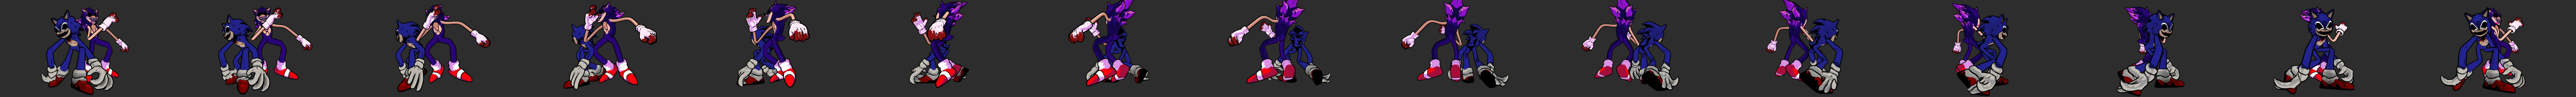 Fan made sonic.exe/Xenophanes main sprites [phase 1 Too slow and phase